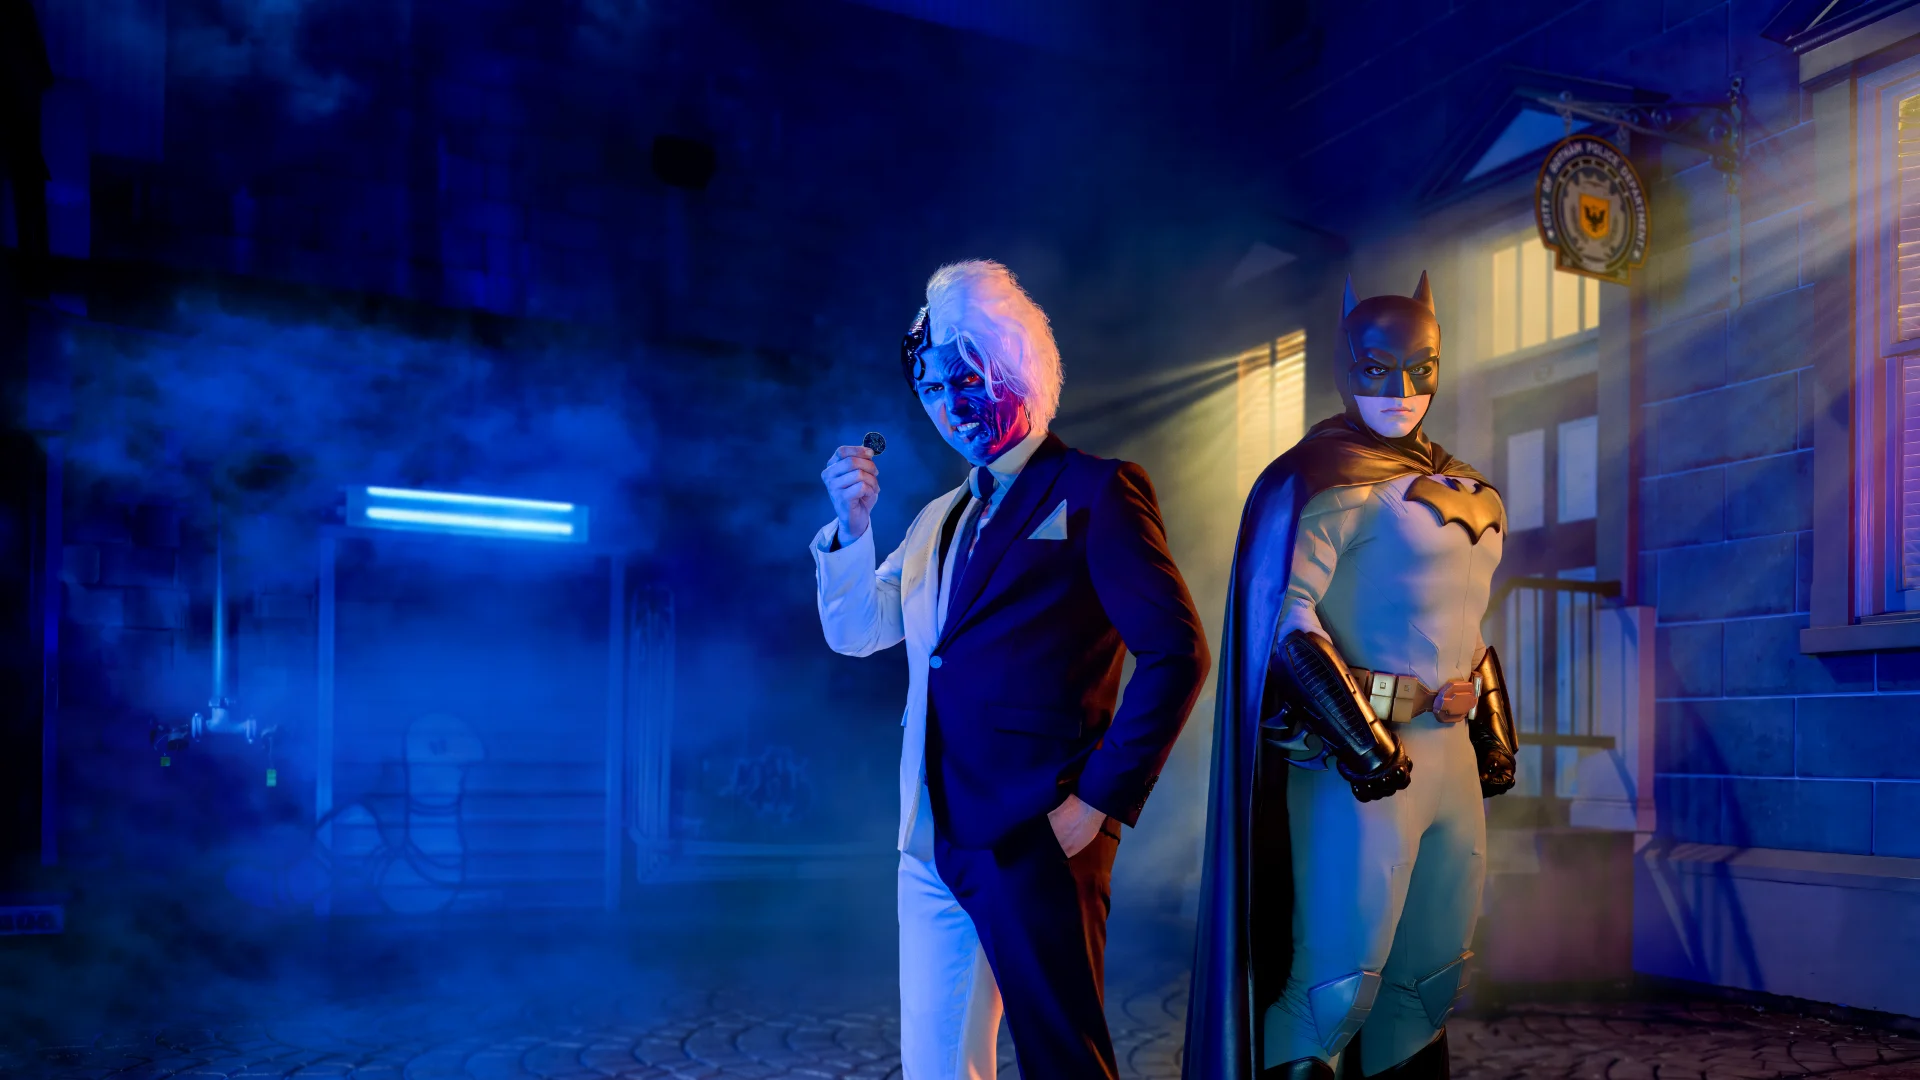 Two costumed individuals stand in a dimly-lit alley: one in a white suit with a blue face holding a mask, and the other dressed as Batman, surrounded by blue and orange light.